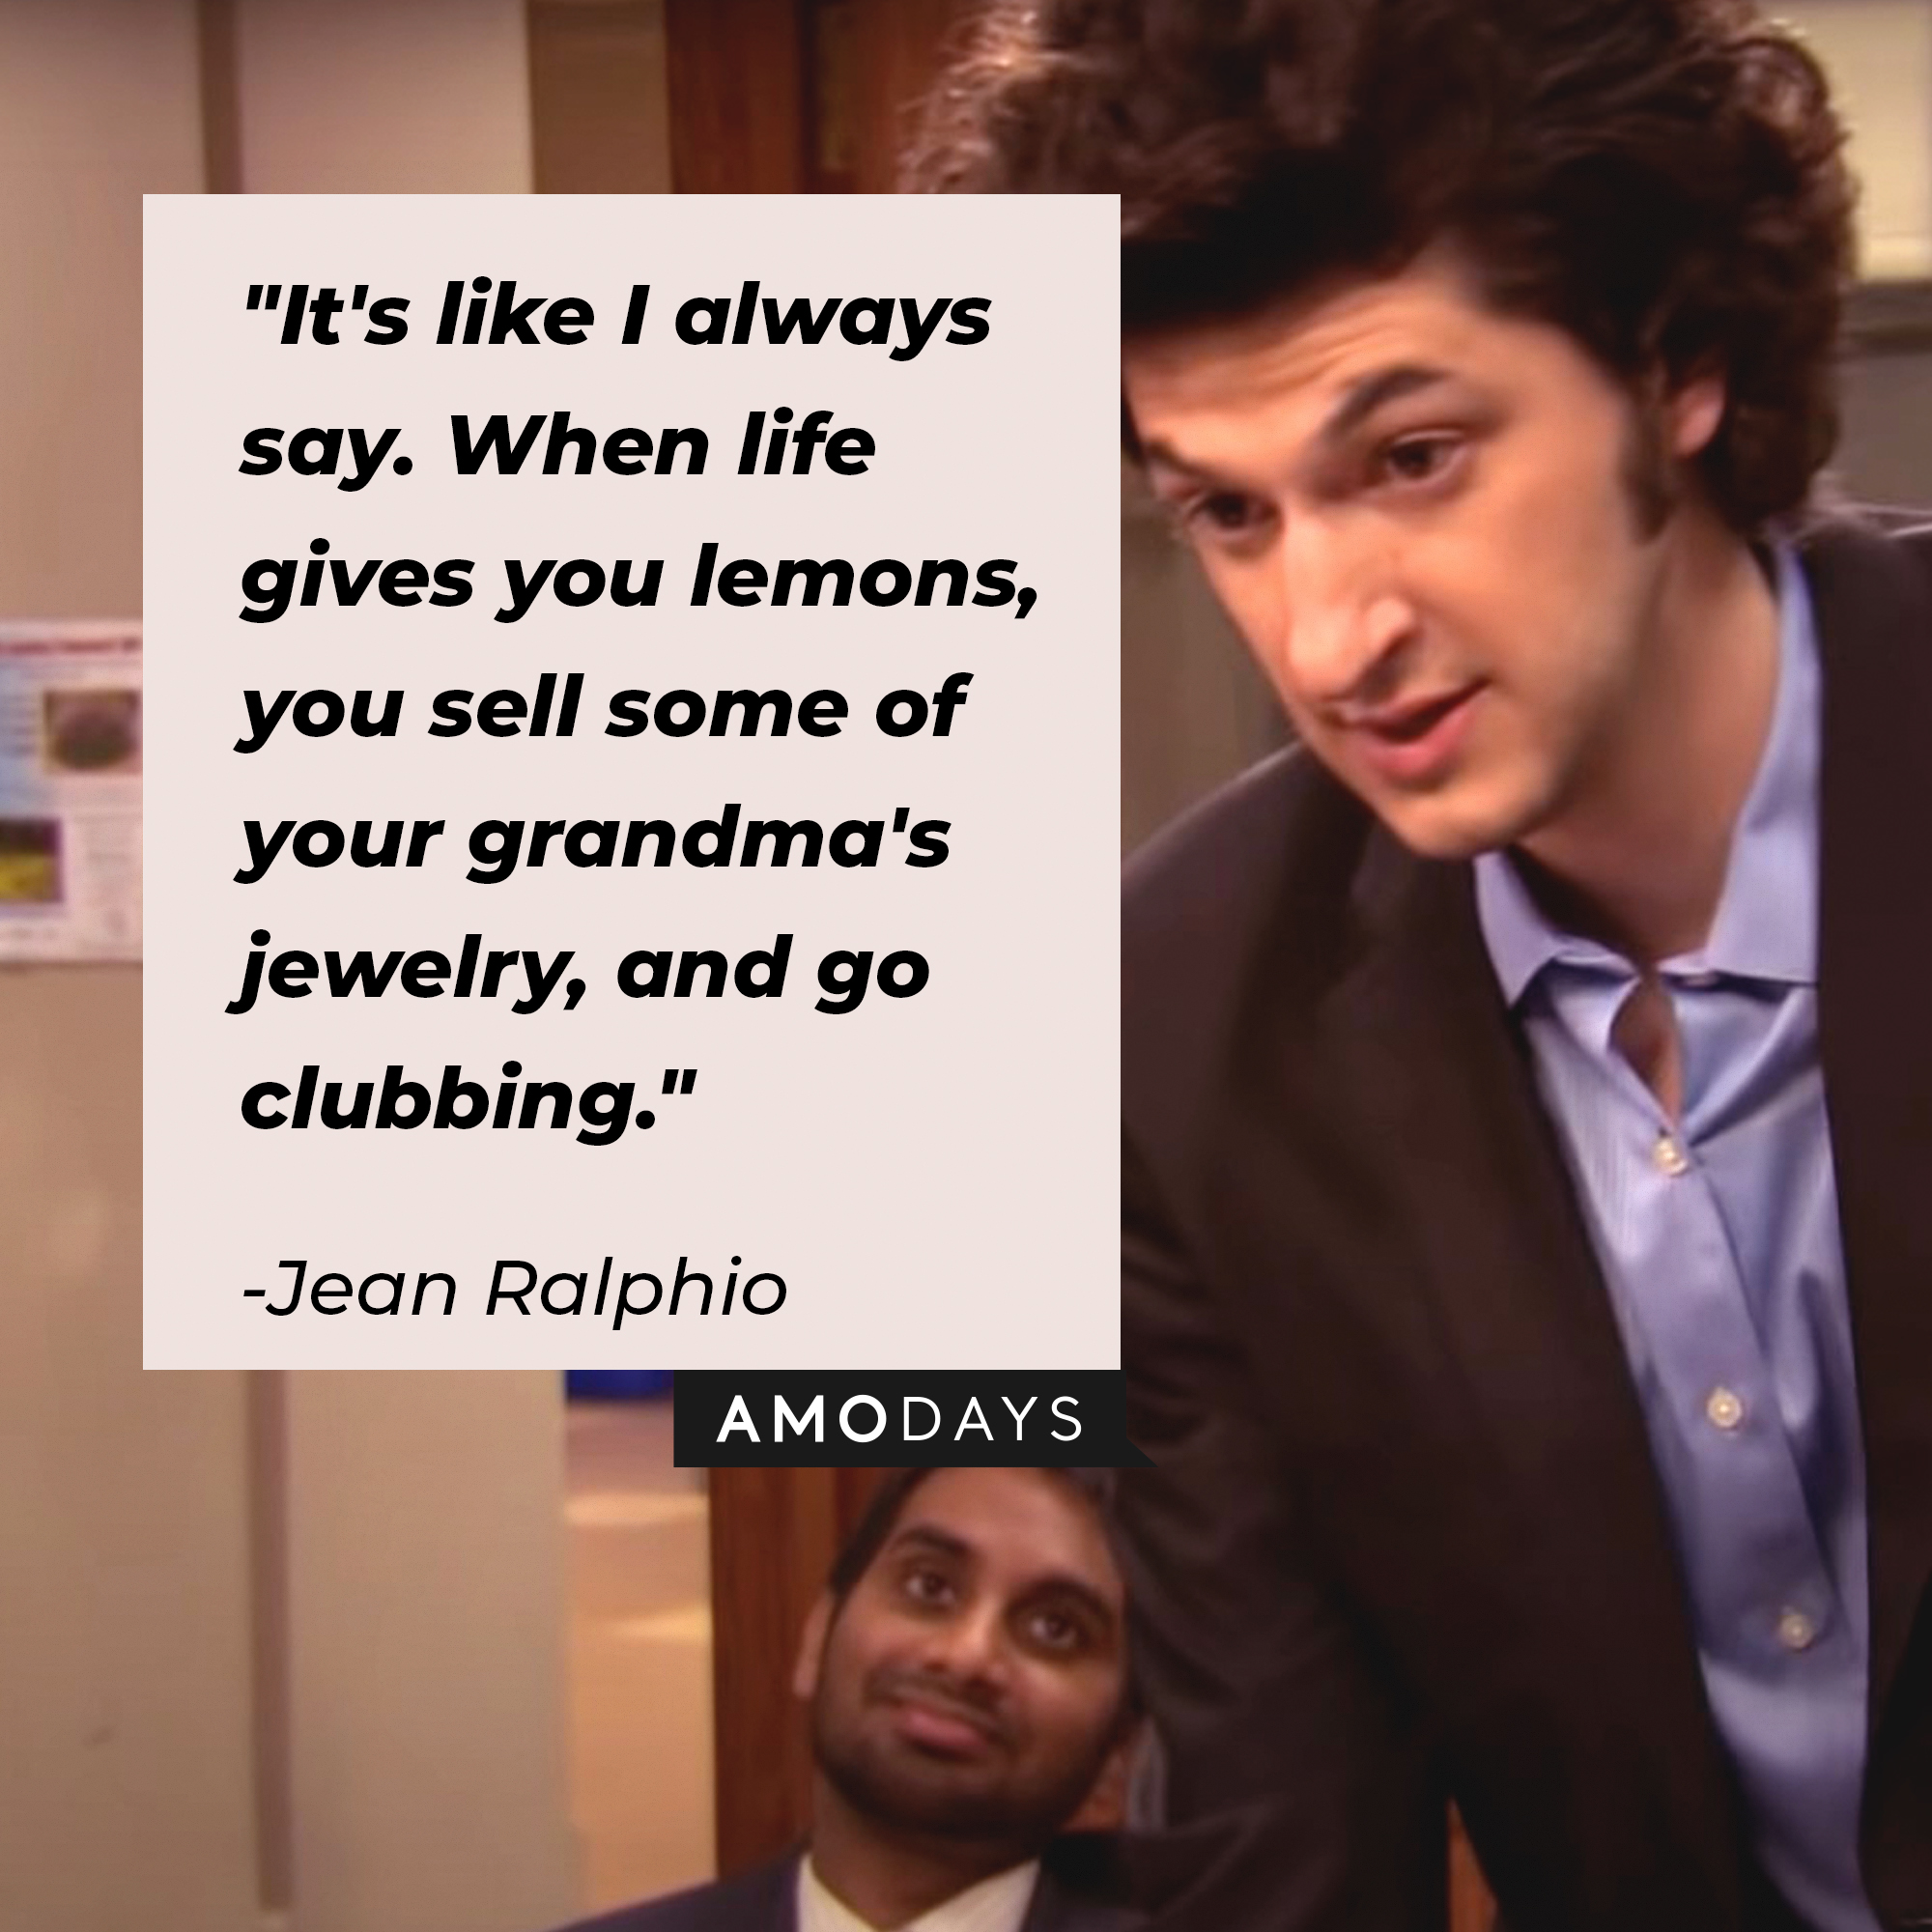 Jean Ralphio's quote: "It's like I always say. When life gives you lemons, you sell some of your grandma's jewelry, and go clubbing." | Source: Facebook.com/parksandrecreation